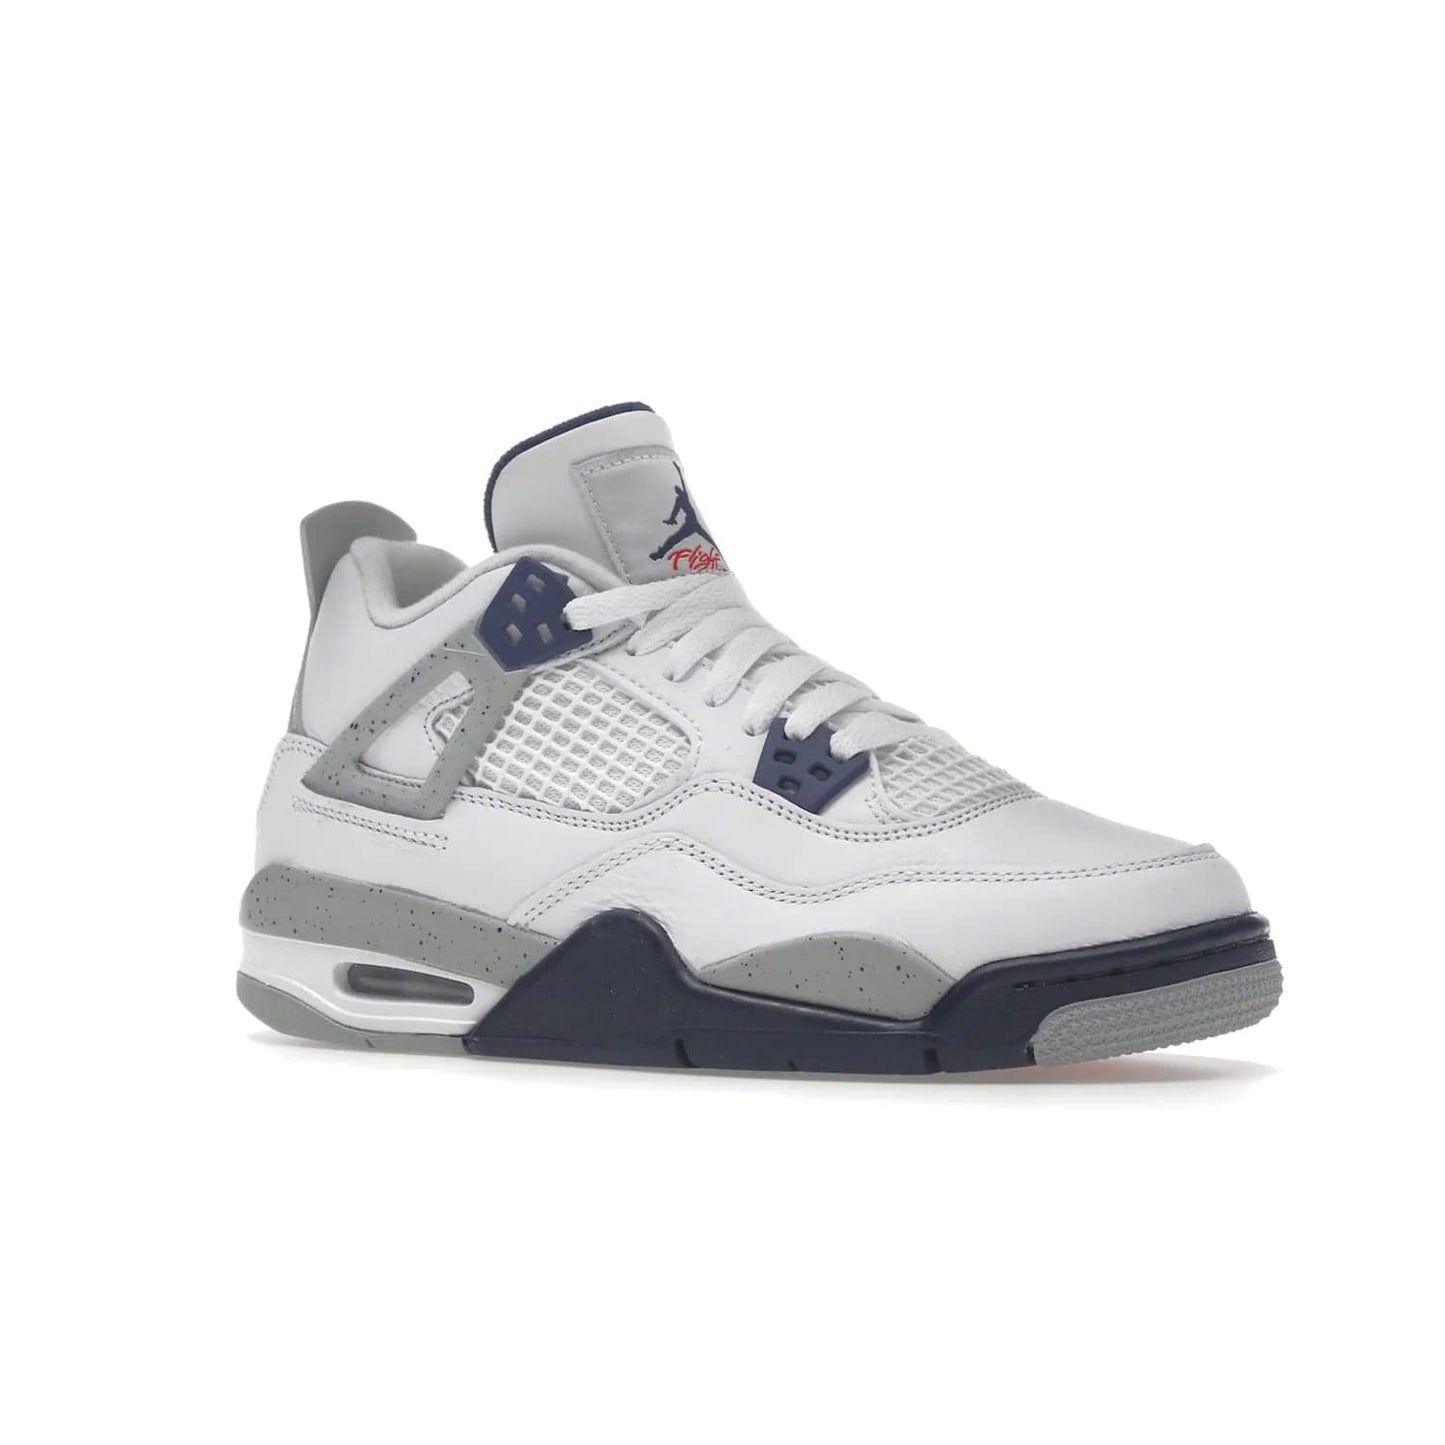 Jordan 4 Retro Midnight Navy (GS) - Image 4 - Only at www.BallersClubKickz.com - Shop the Air Jordan 4 Retro Midnight Navy GS. The white leather upper features black support wings & heel tab, navy eyelets & woven tongue tag with Jumpman logos. The midsole features two-tone polyurethane insole & AIR units in the heel & forefoot. Get the white/midnight navy/light smoke grey/fire colorway & show off your style.